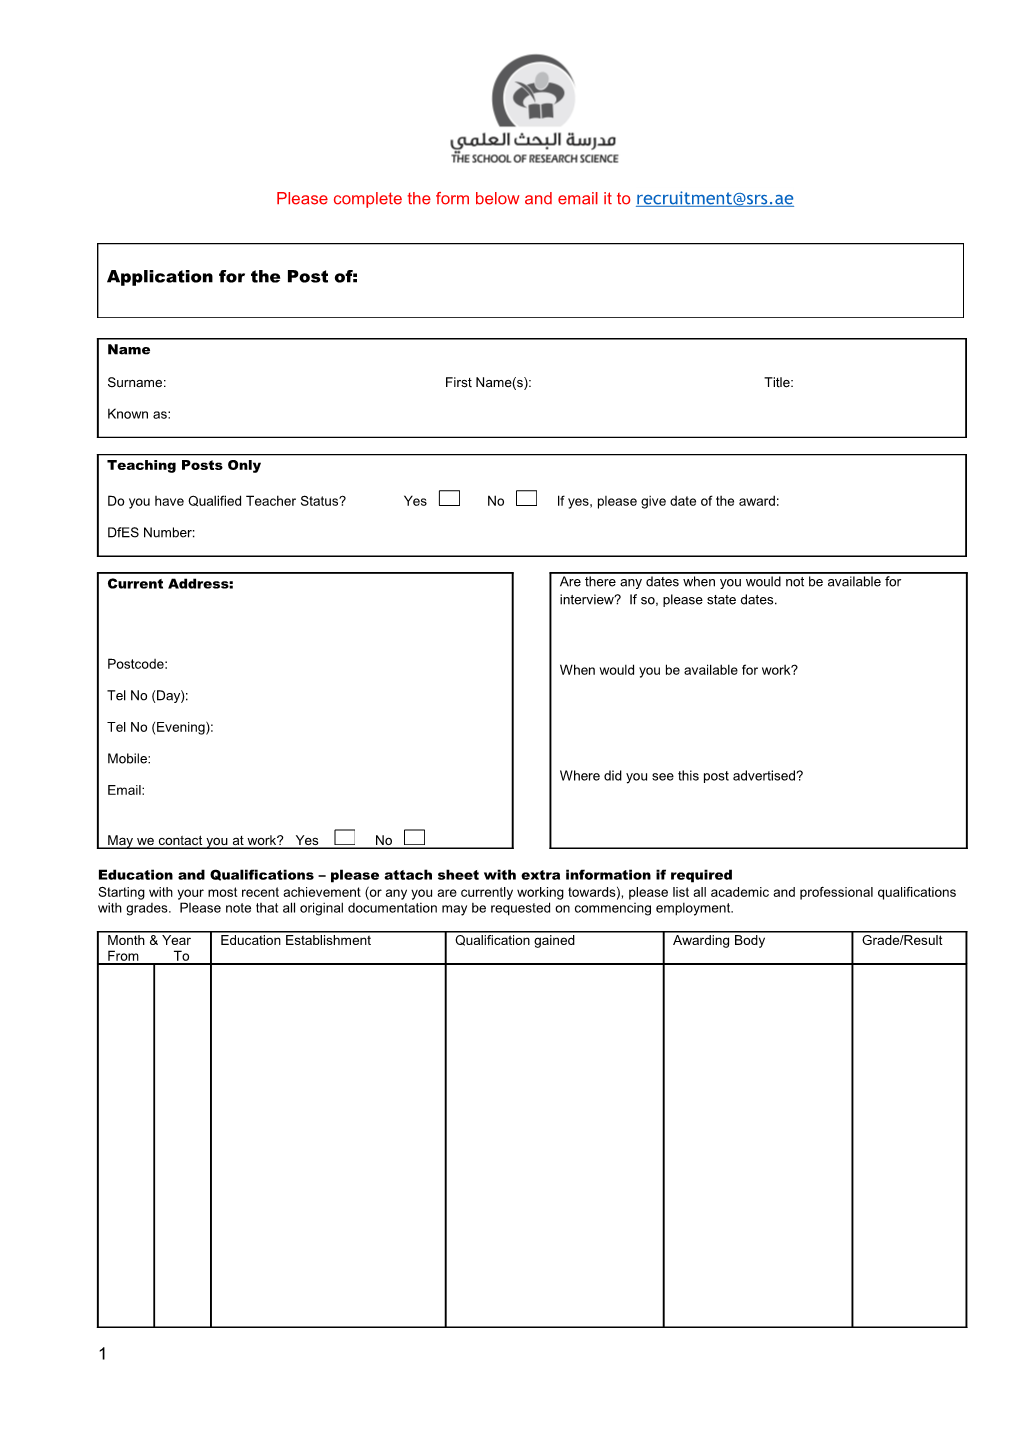 Please Complete the Form Below and Email It